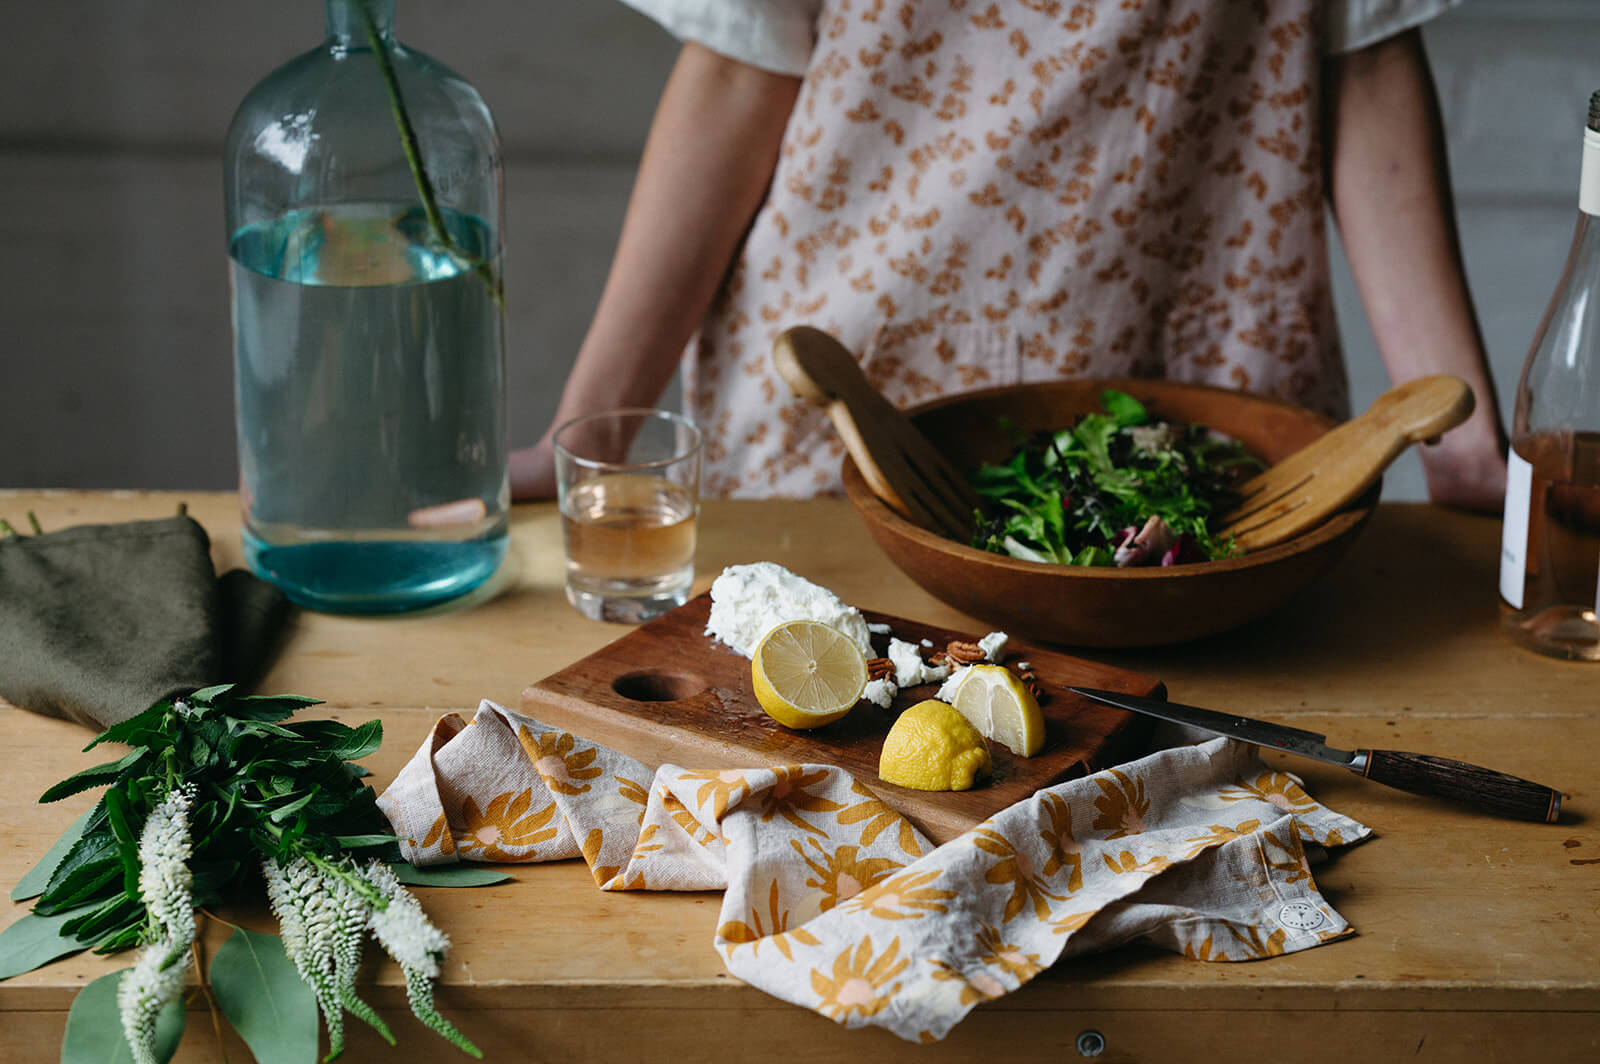 Wooden table with bowl of salad, lemons and cheese on a cutting board and a dish towel